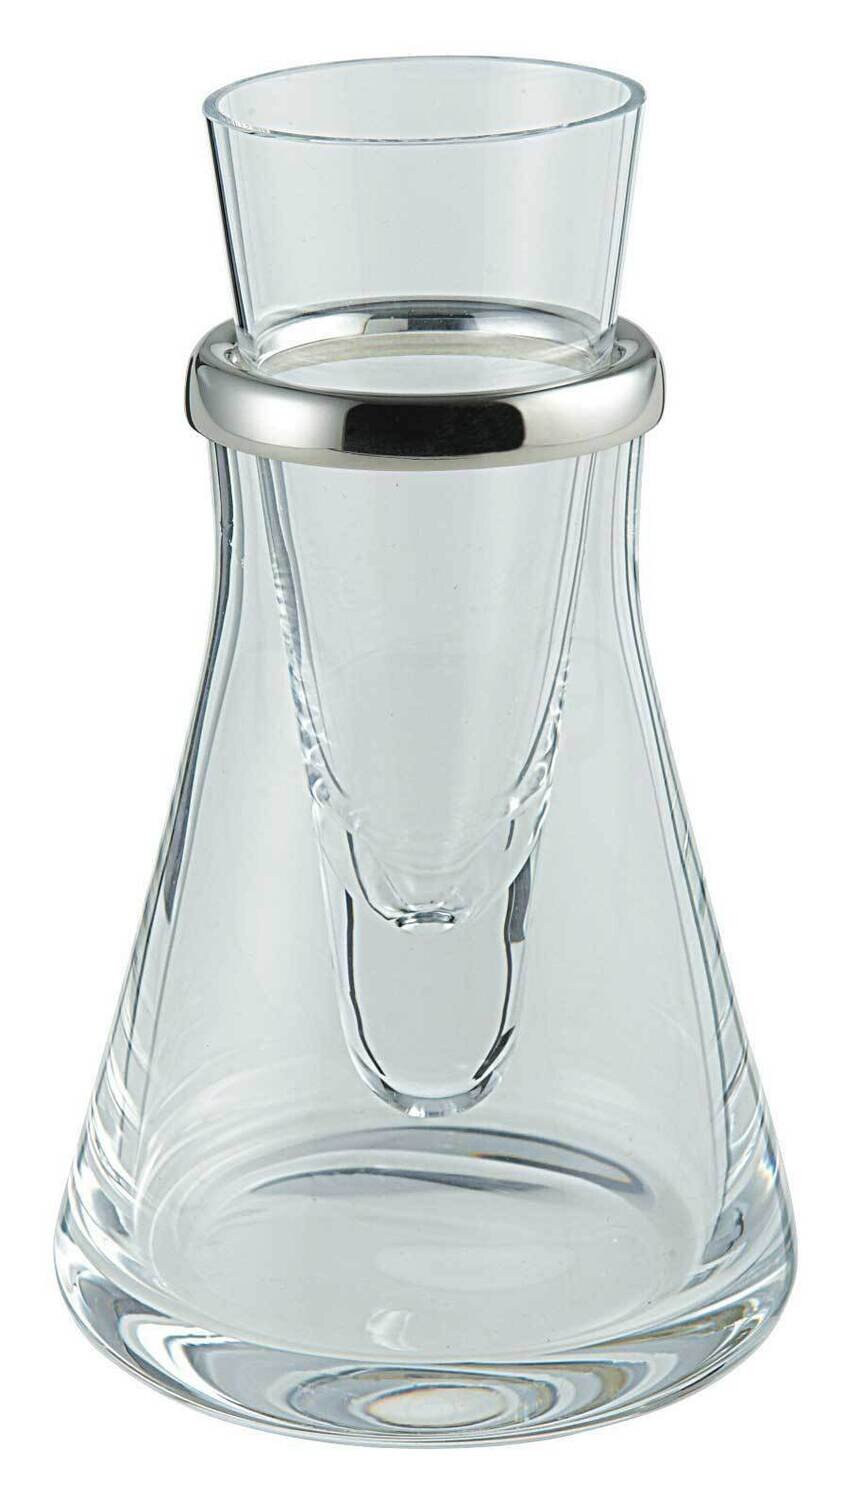 Ercuis eclat Refreshing Vodka Glass 4.875 Inch Silver Plated F540141-01